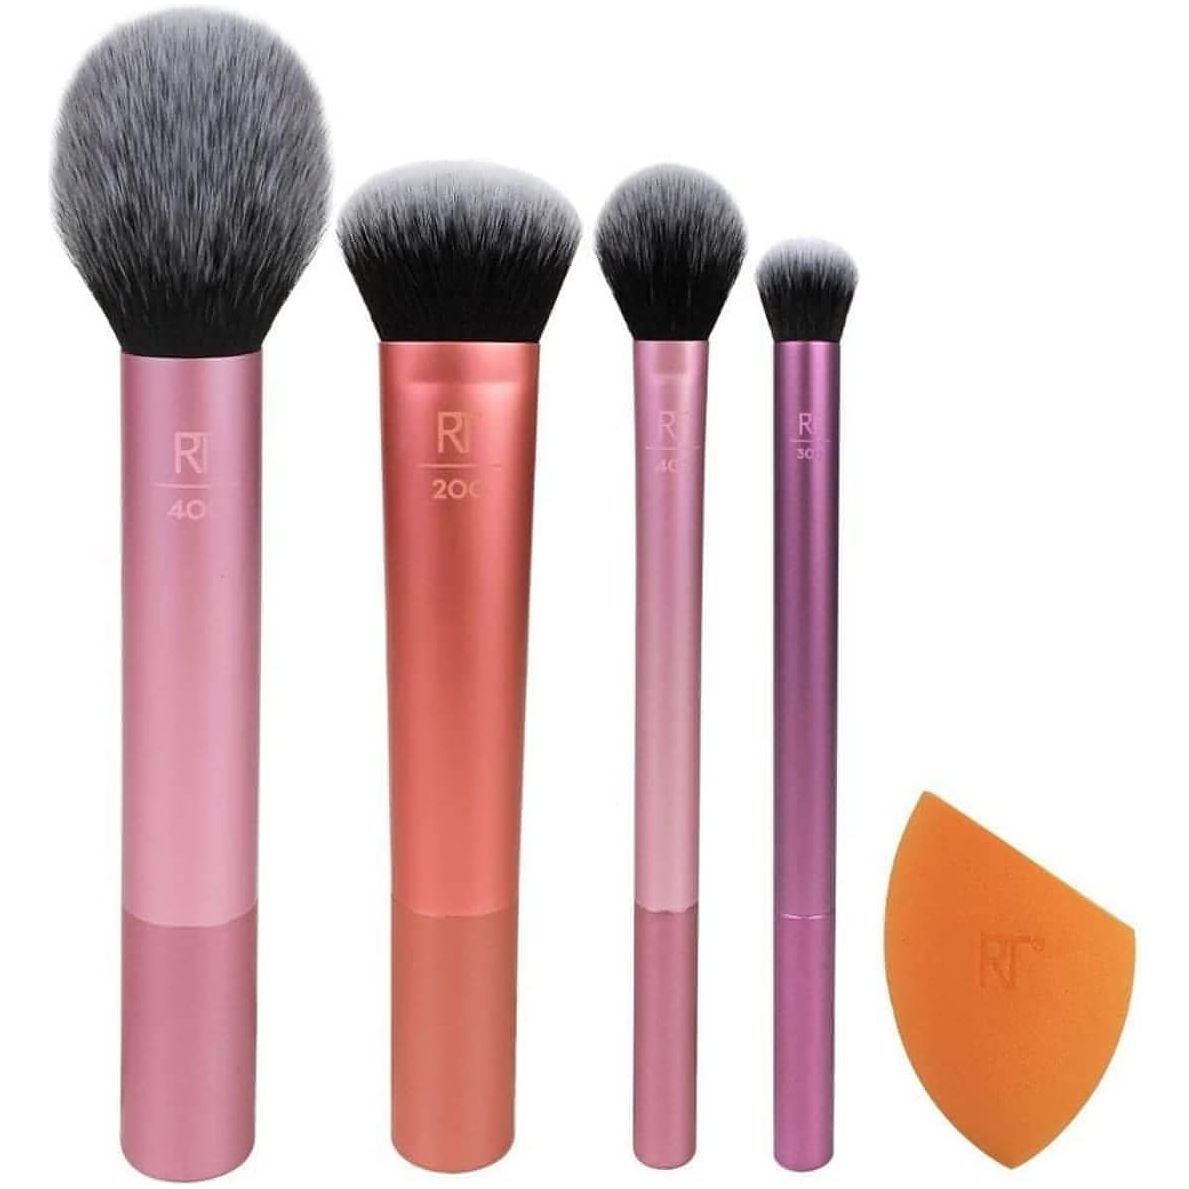 The Everyday Essentials set from Real Techniques gives you 5 essential tools to master any look tapered, soft and fluffy bristles. Blend powder blush evenly for a smooth, natural look